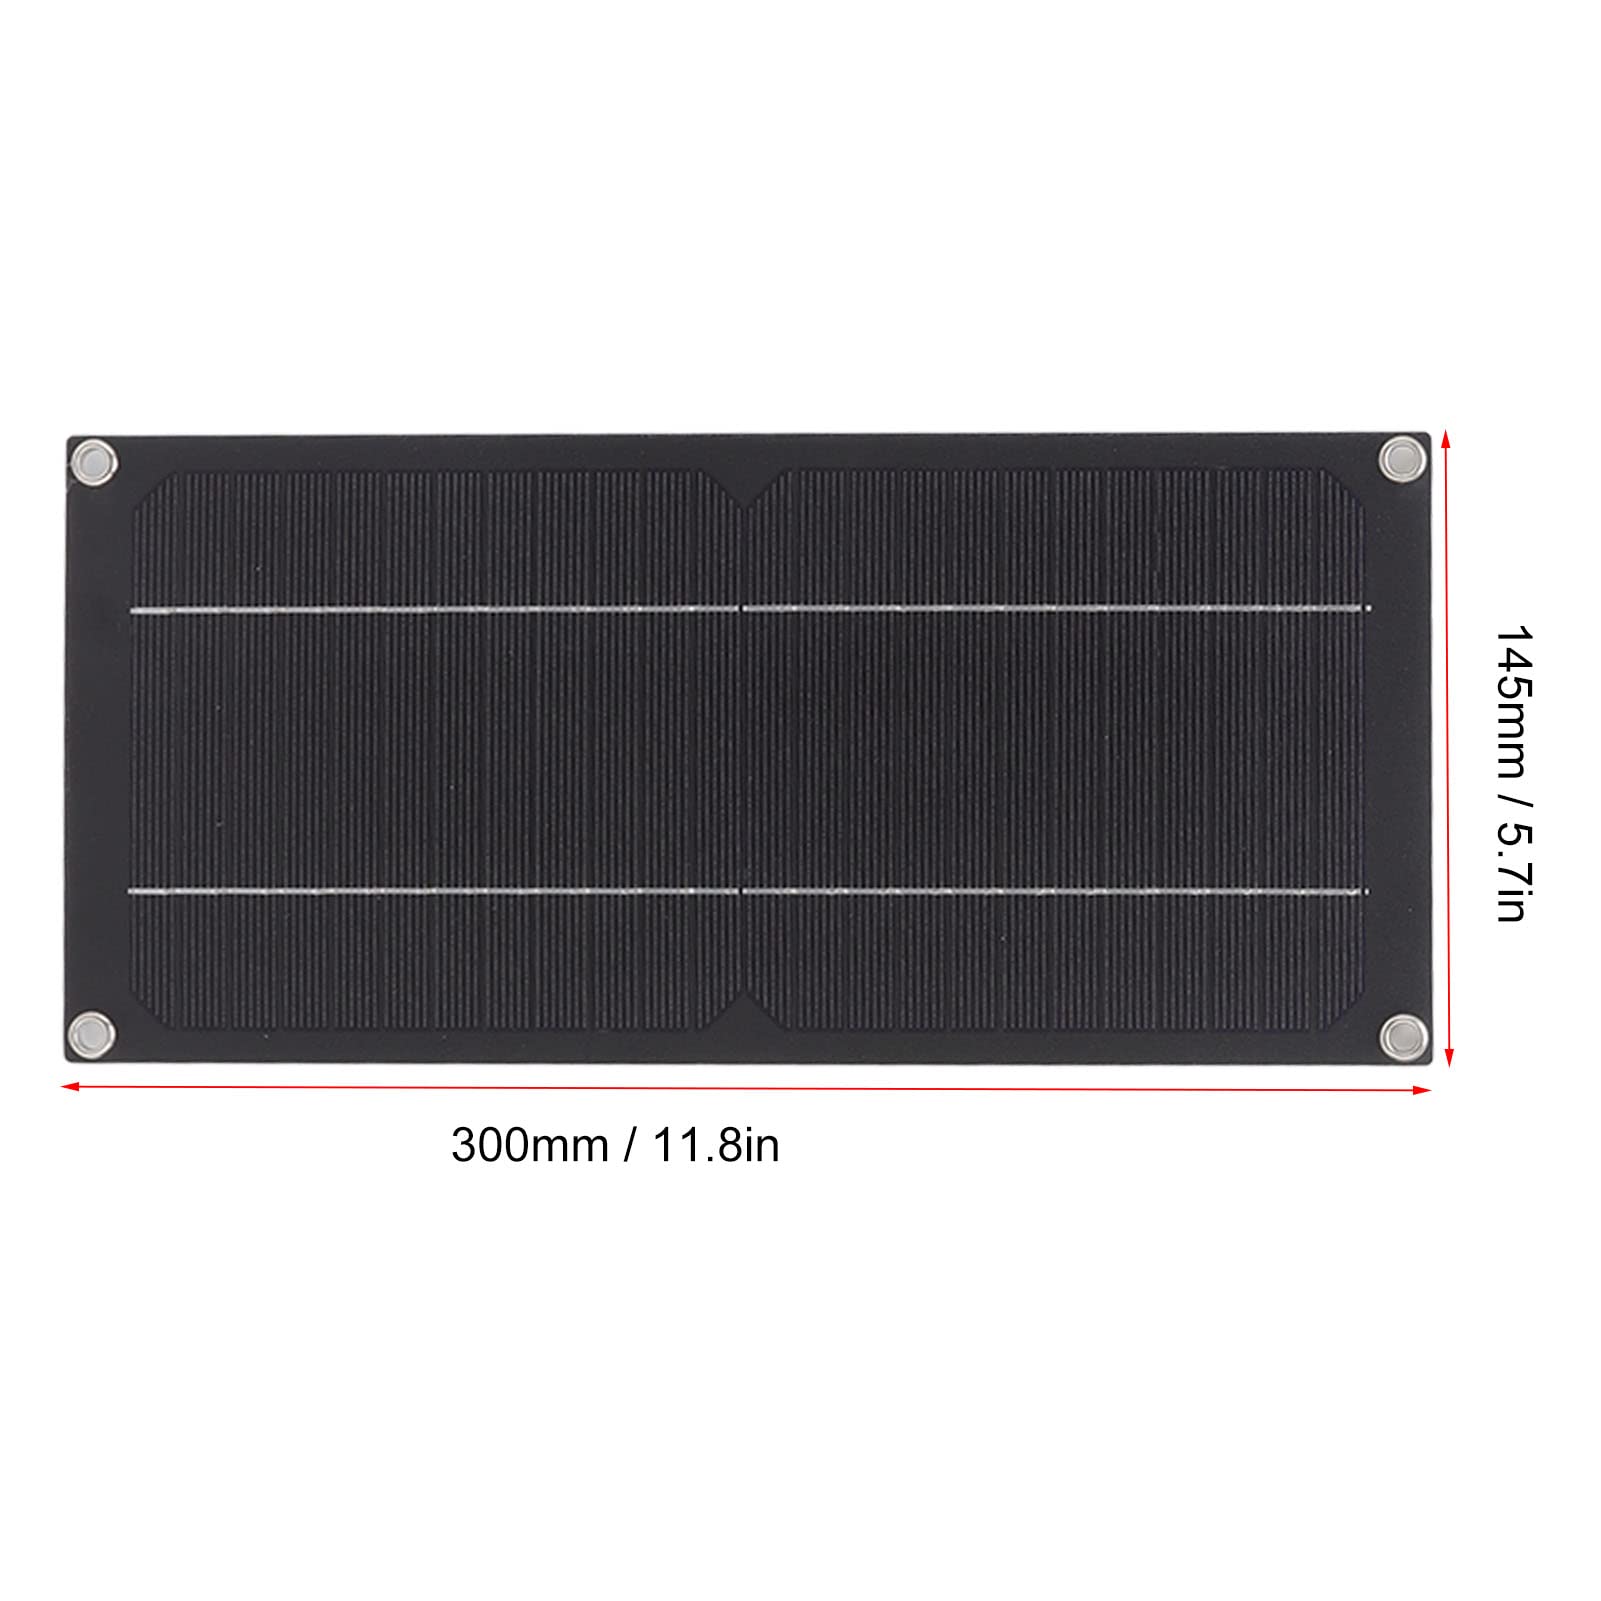 600W 18V Portable Solar Panel 100A Battery Charger Controller Battery Charging KitSolar Panel Kit for Outdoor Farming Camping Trailer Solar Panels